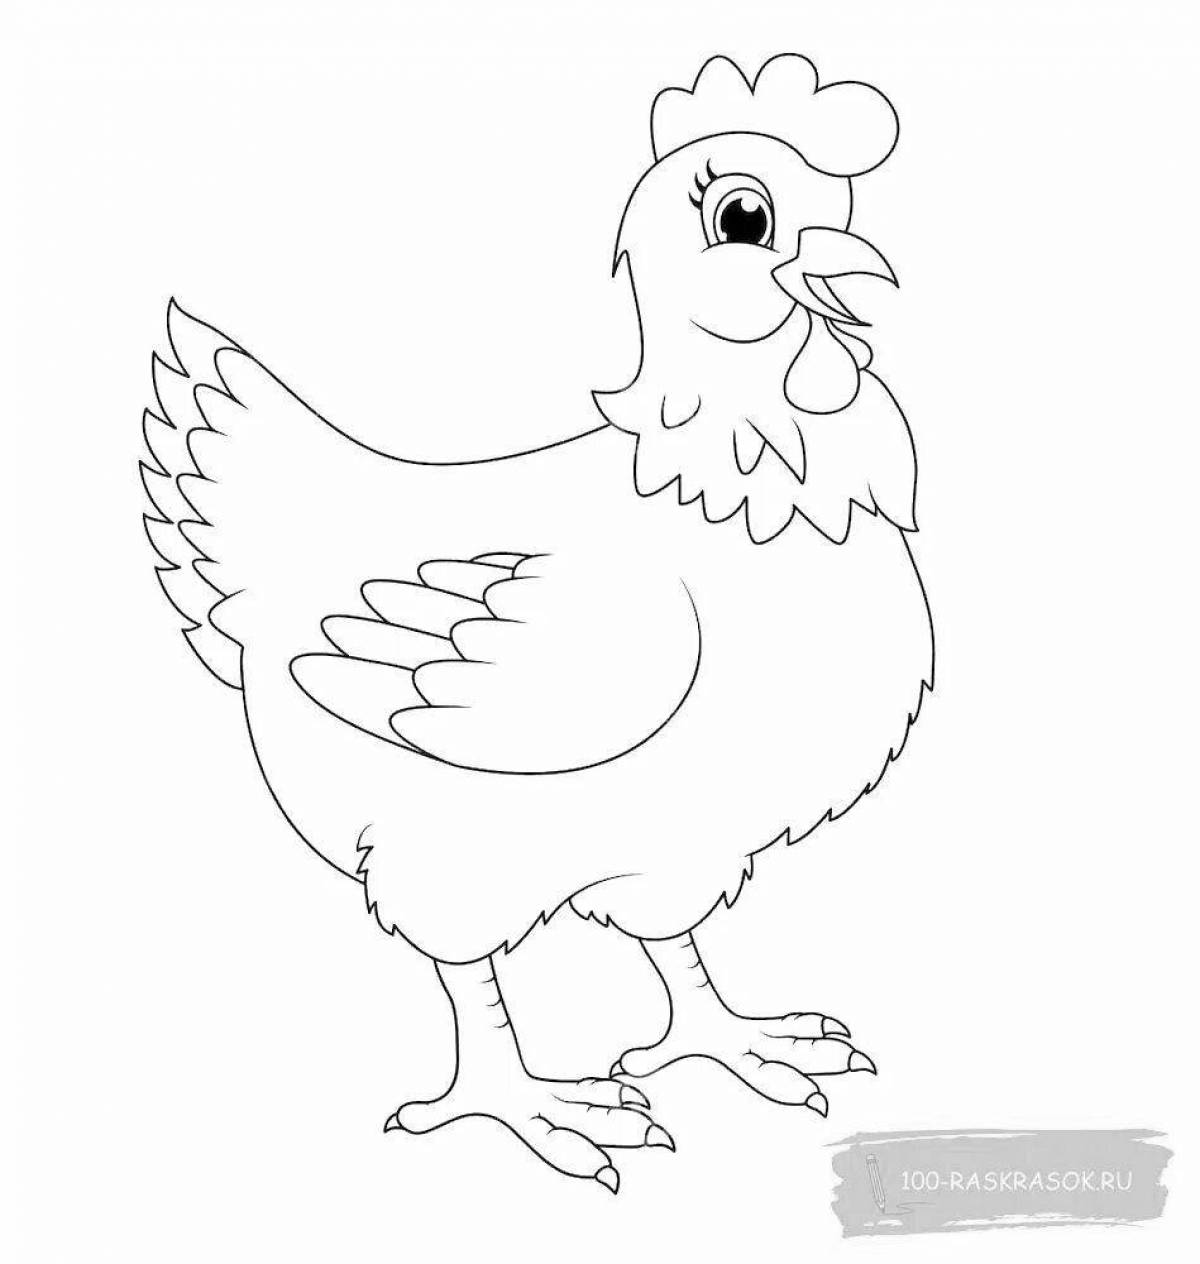 Chicken bright coloring for 2-3 year olds